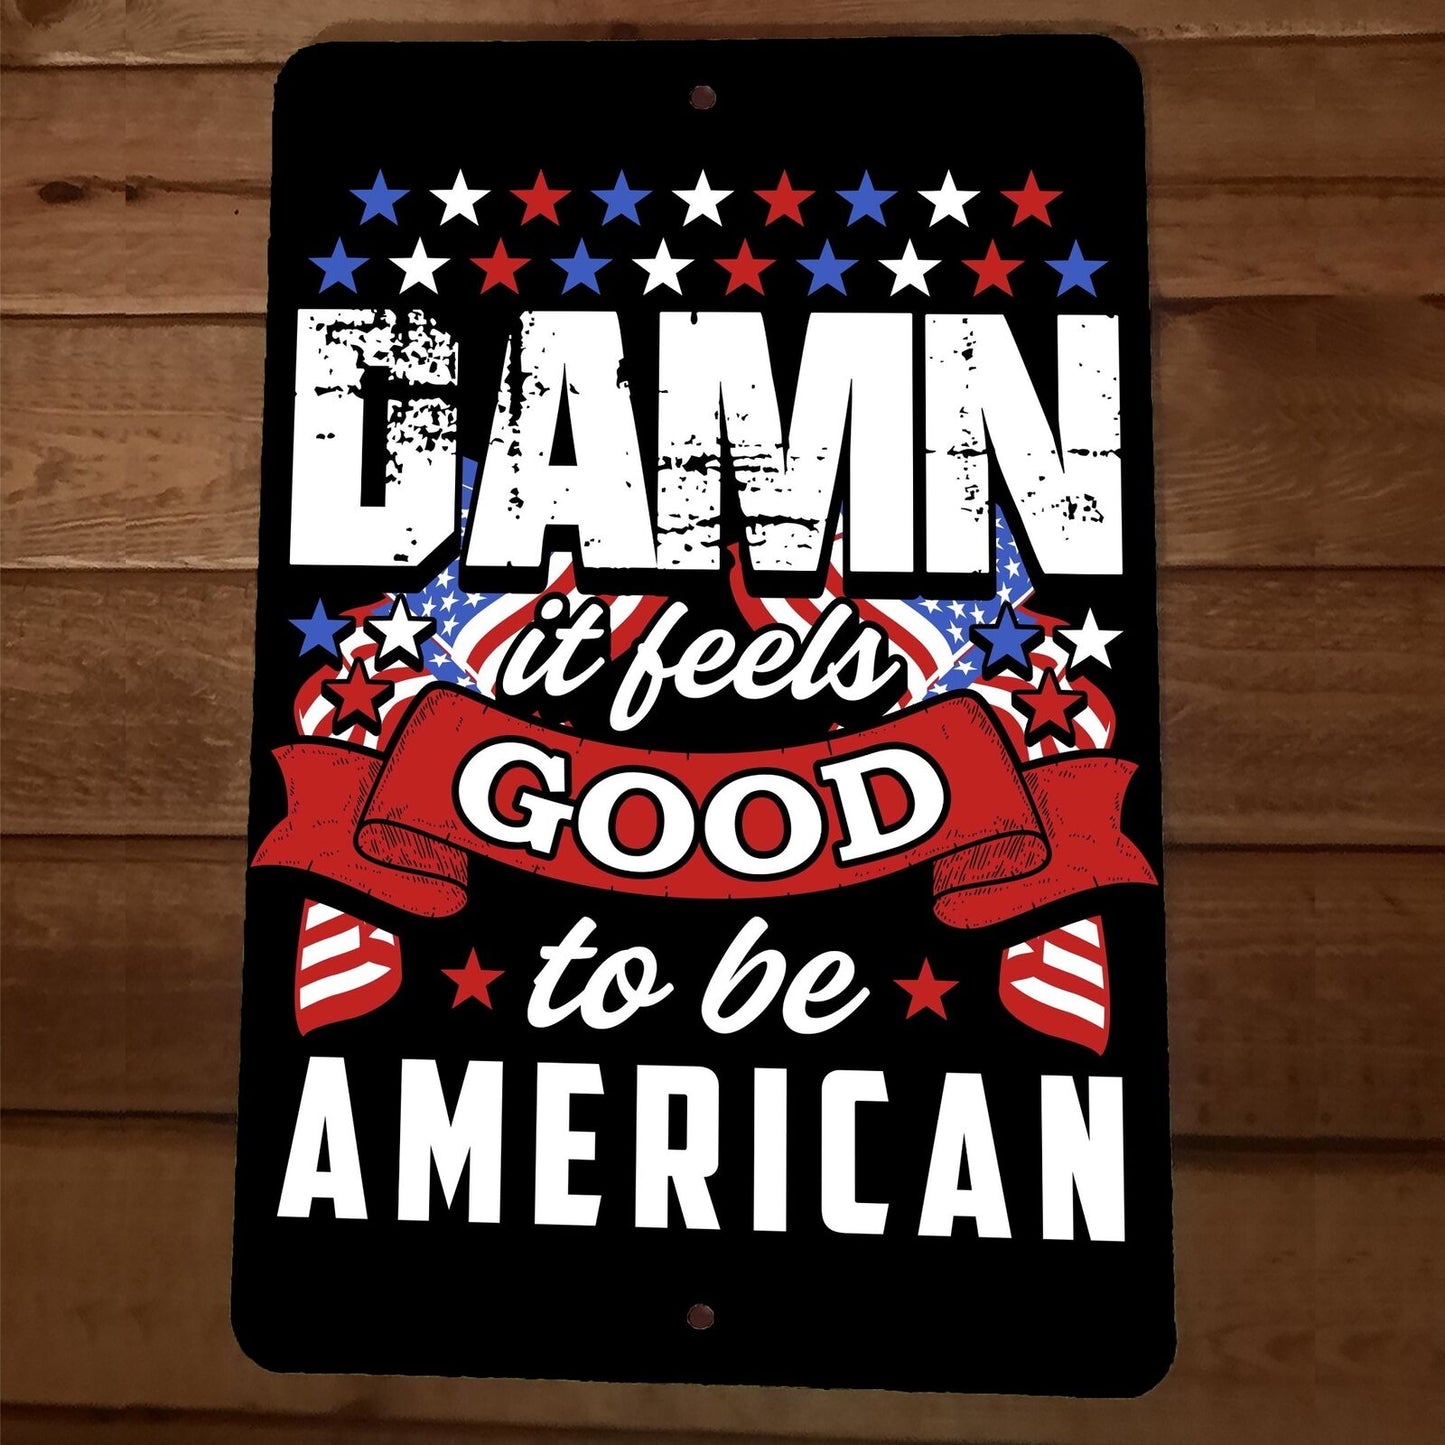 D*mn It Feels Good to be American 8x12 Metal Wall Sign Poster July 4th